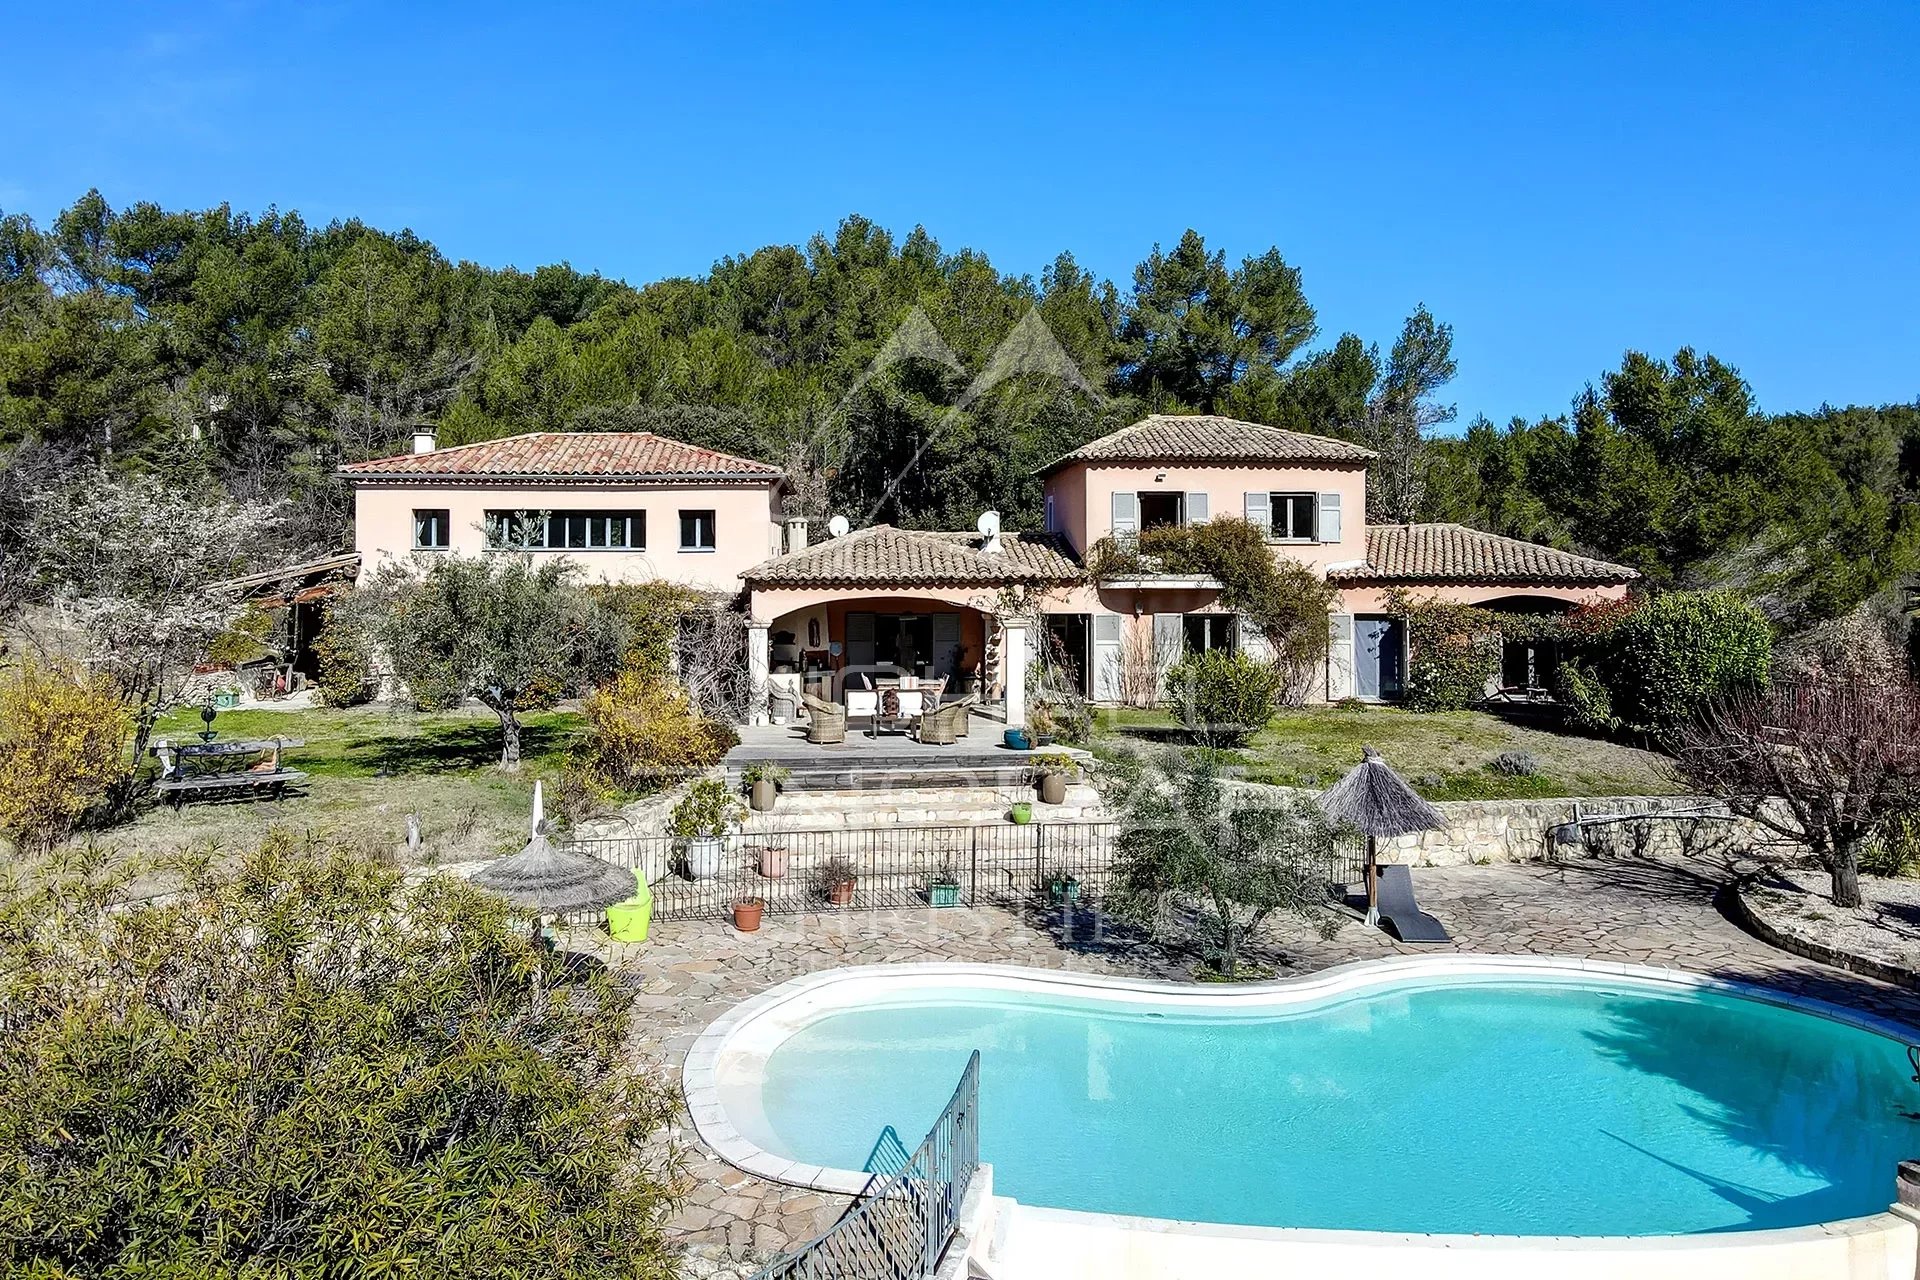 Family villa in the heart of the Provençal hill